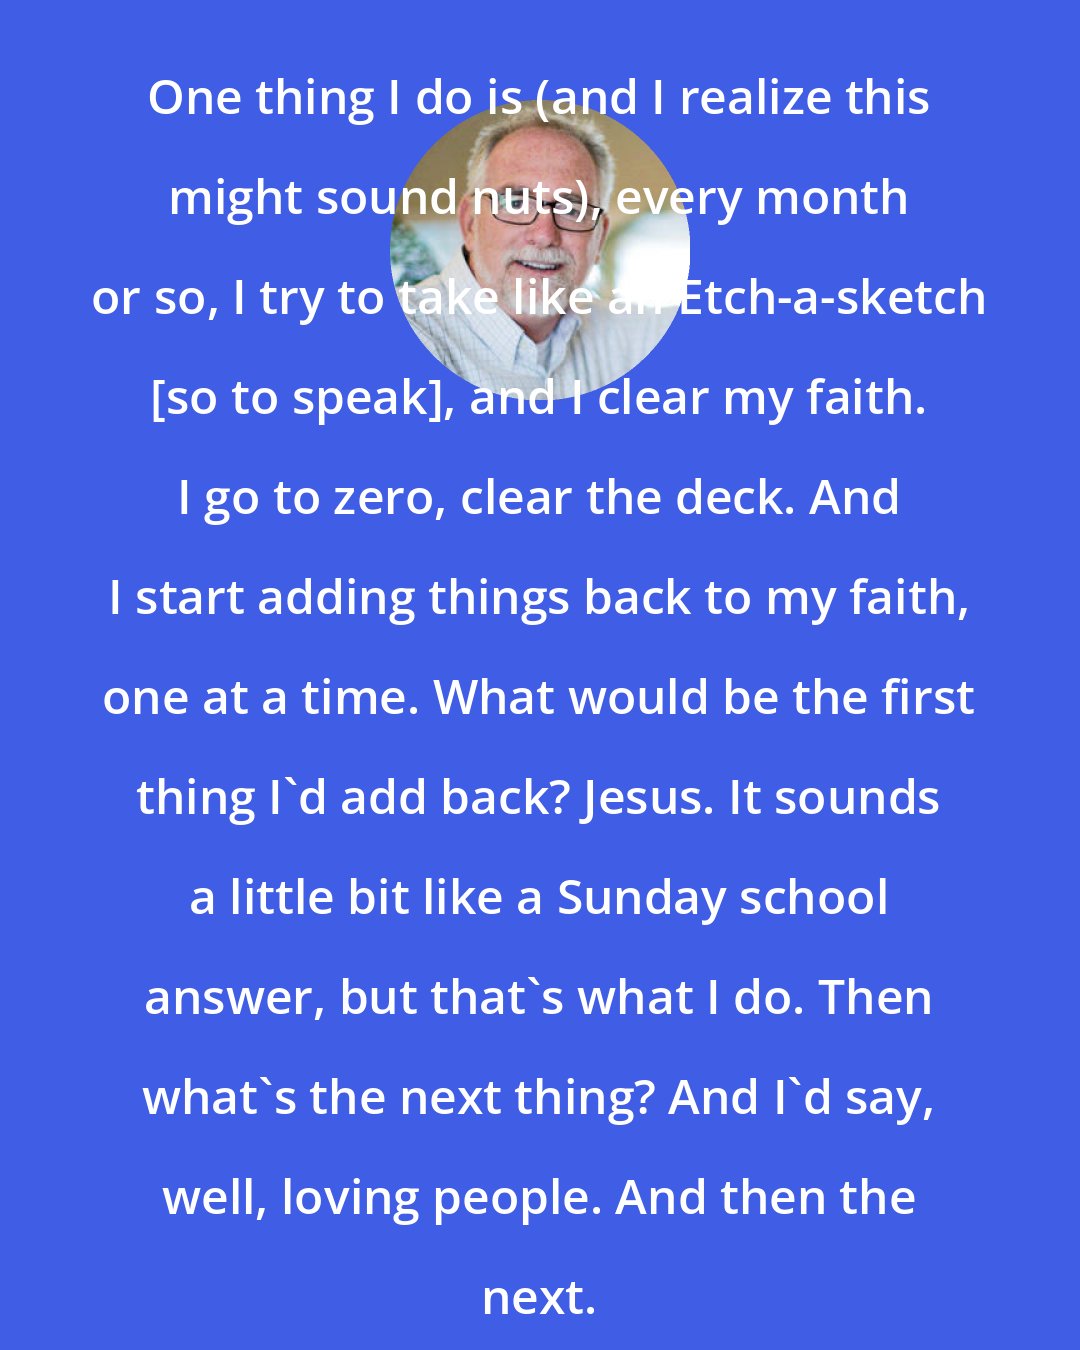 Bob Goff: One thing I do is (and I realize this might sound nuts), every month or so, I try to take like an Etch-a-sketch [so to speak], and I clear my faith. I go to zero, clear the deck. And I start adding things back to my faith, one at a time. What would be the first thing I'd add back? Jesus. It sounds a little bit like a Sunday school answer, but that's what I do. Then what's the next thing? And I'd say, well, loving people. And then the next.